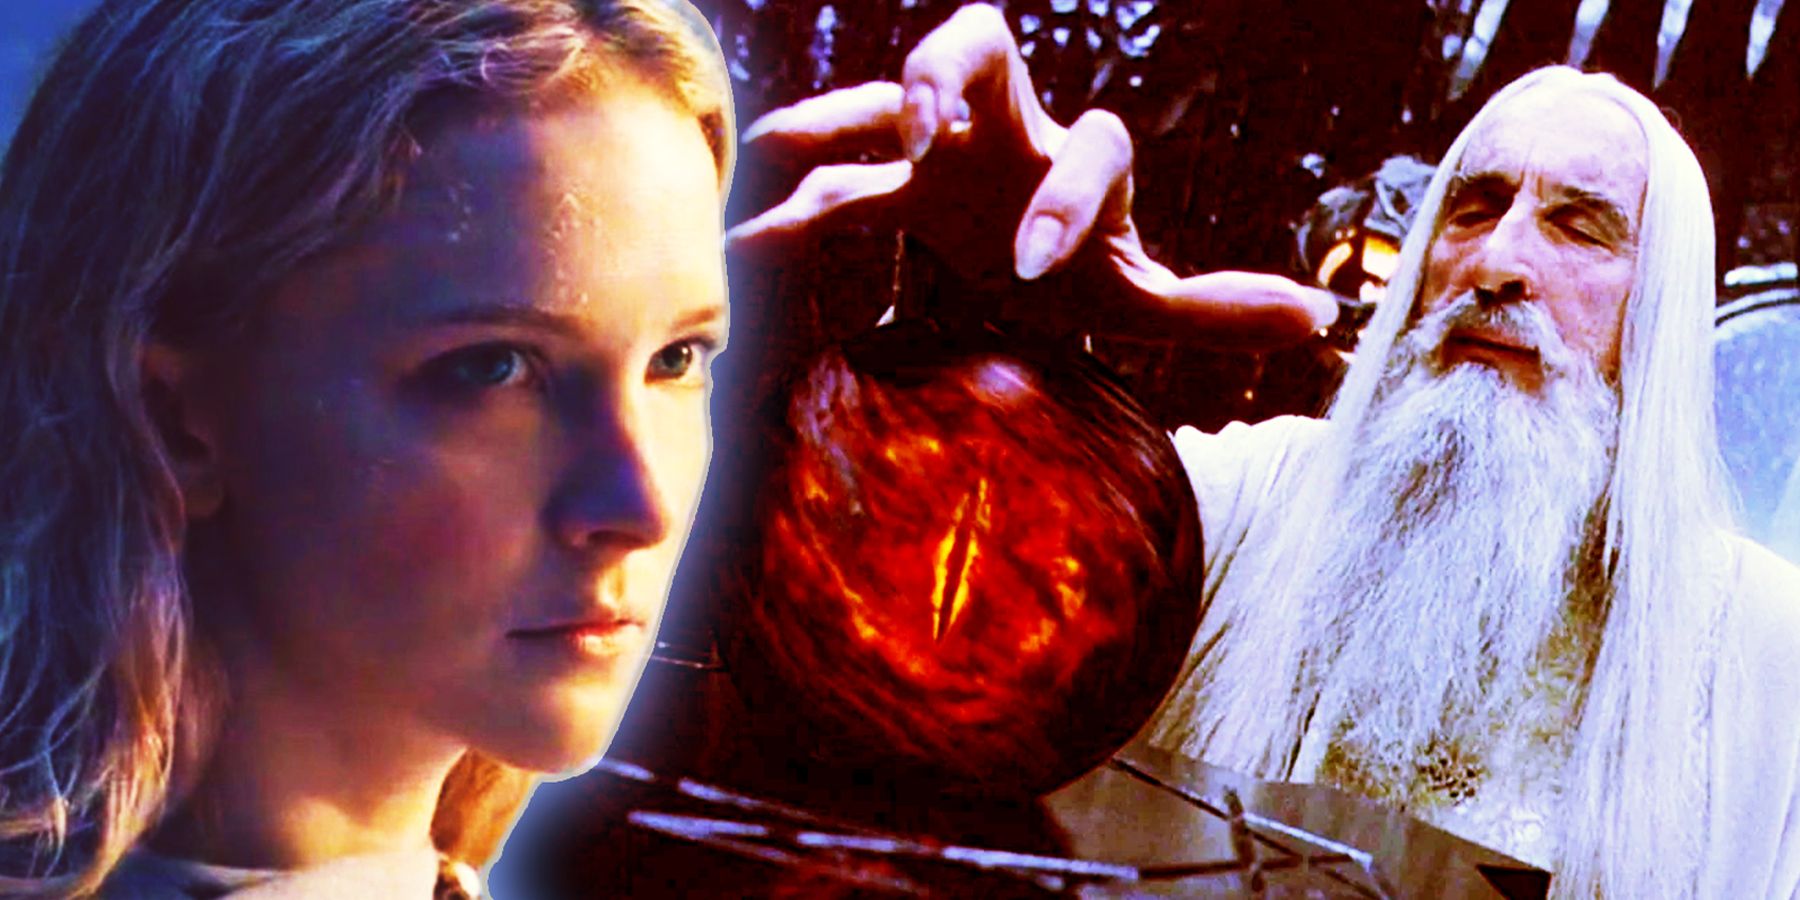 Galadriel and Saruman from The Lord of the Rings and Rings of Power split image